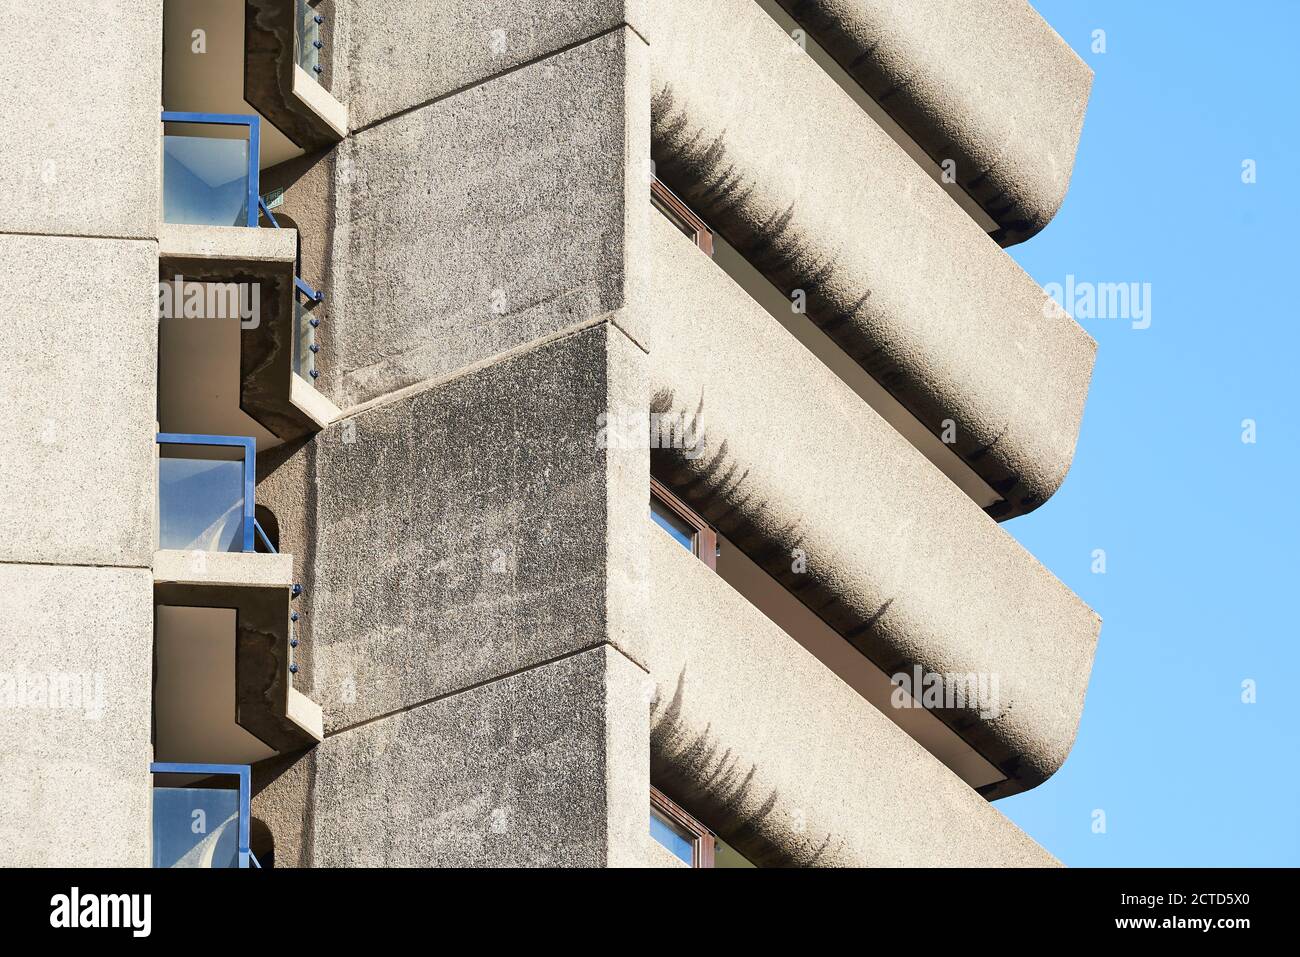 Exterior detail of Lauderdale Tower, the Barbican Estate, City of London UK. Designed by architects Chamberlin, Powell and Bon. Completed in 1974. Stock Photo